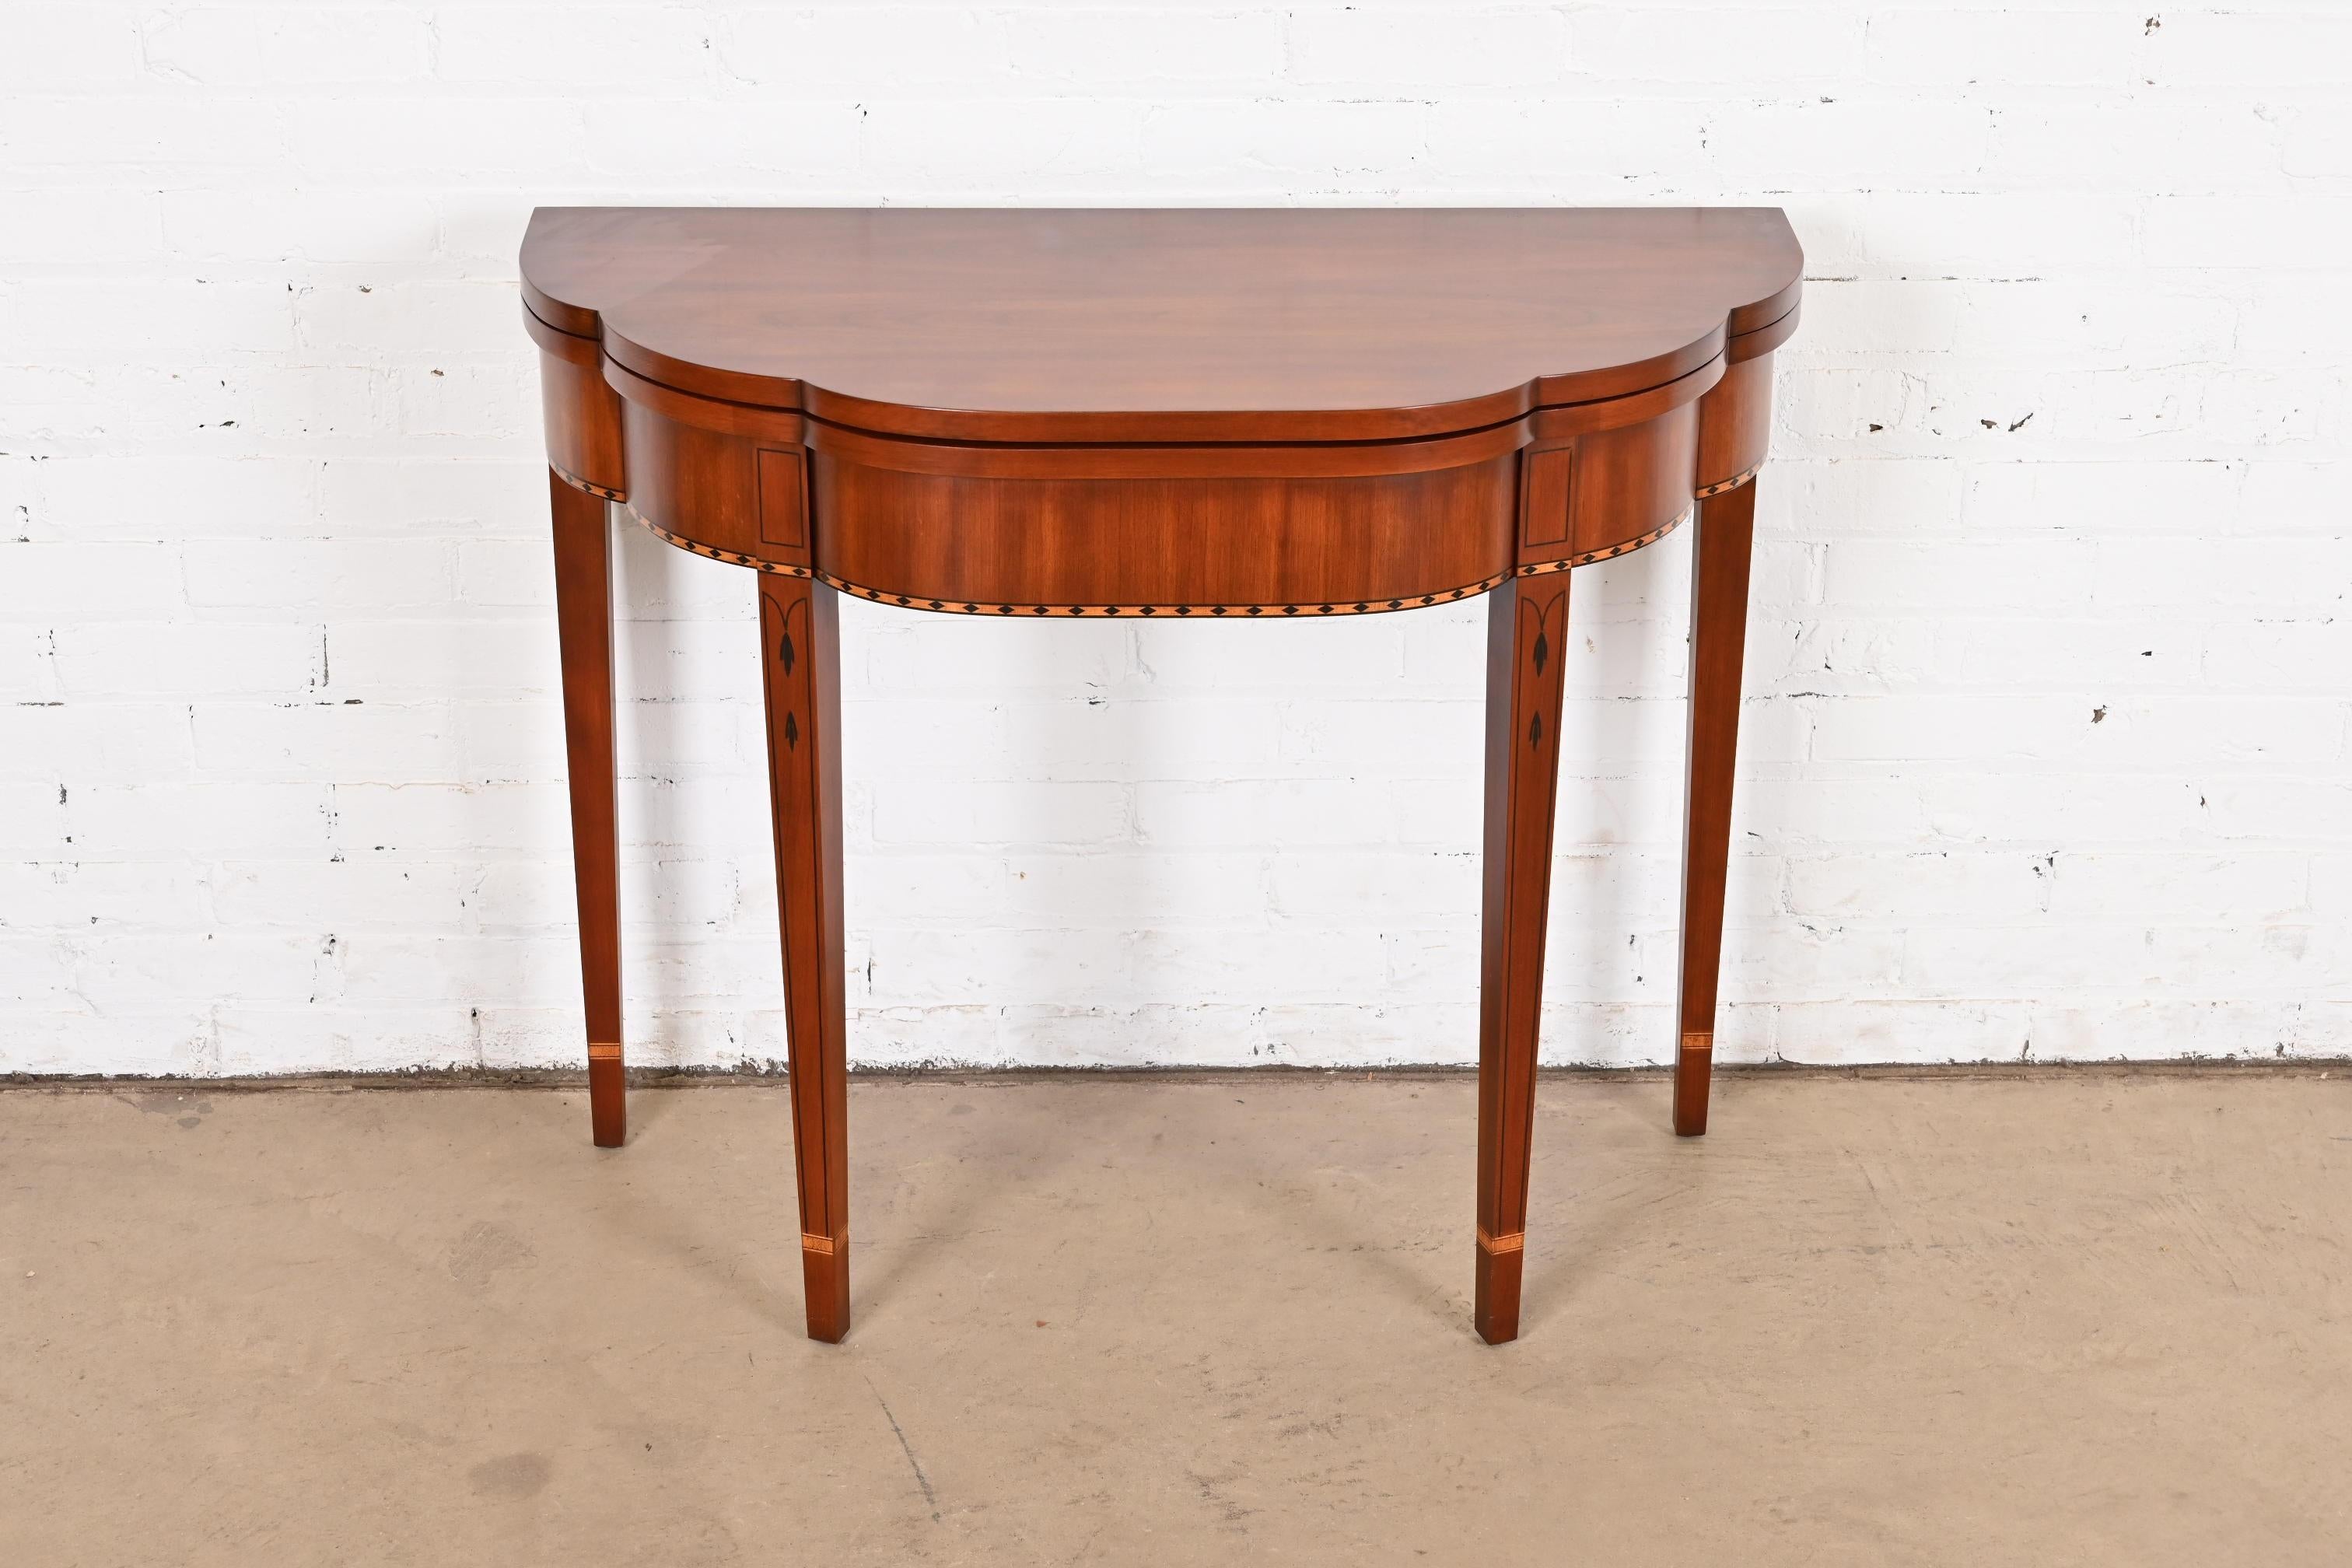 A gorgeous Federal or Hepplewhite style flip top demilune console game table

By Henkel Harris

USA, 1990s

Beautiful cherry wood, with inlaid ebony and satinwood marquetry.

Measures: 36